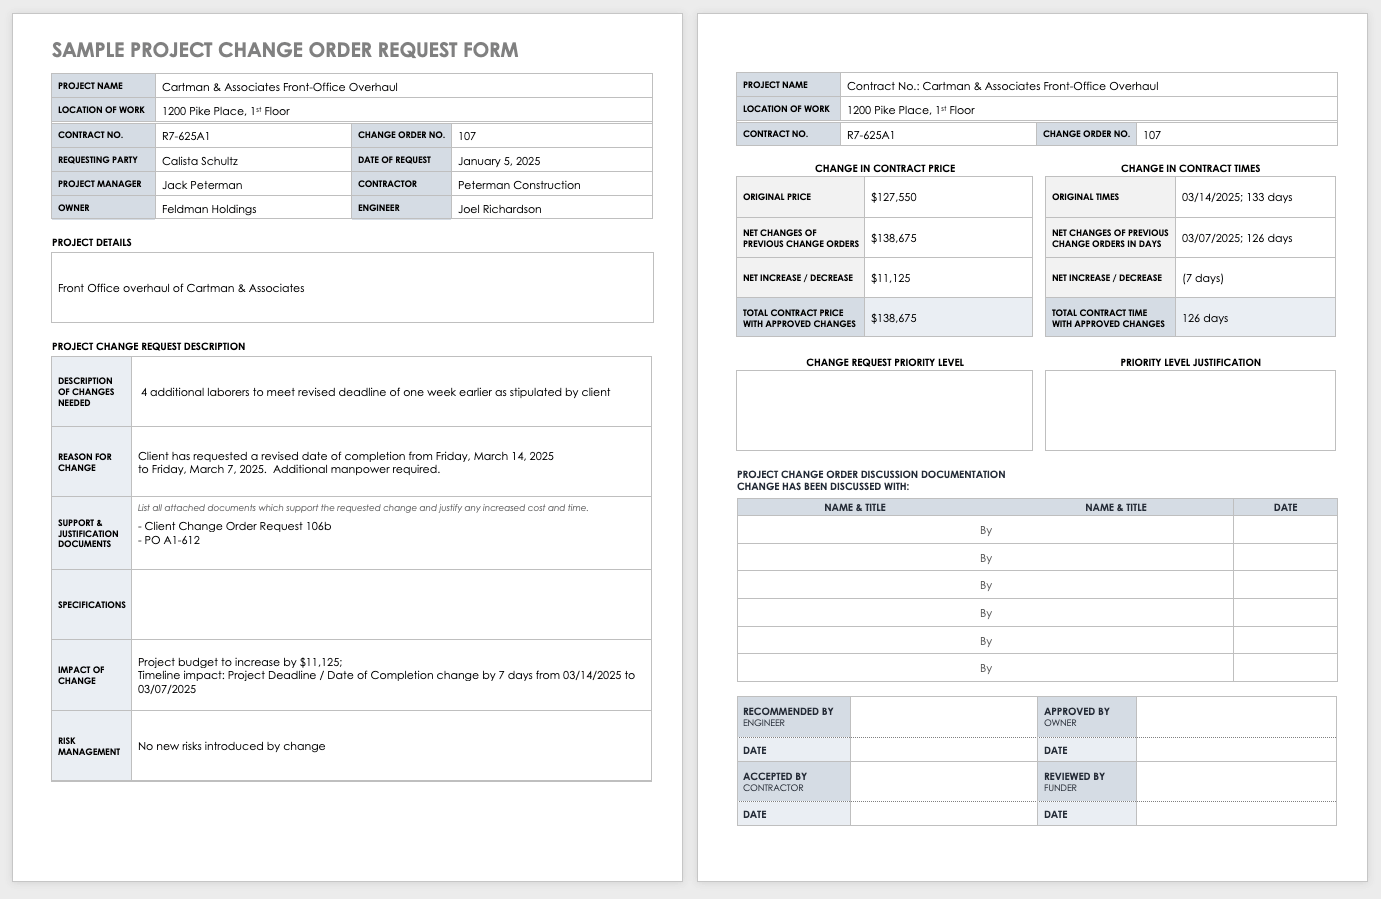 Sample Project Change Order Request Form Template